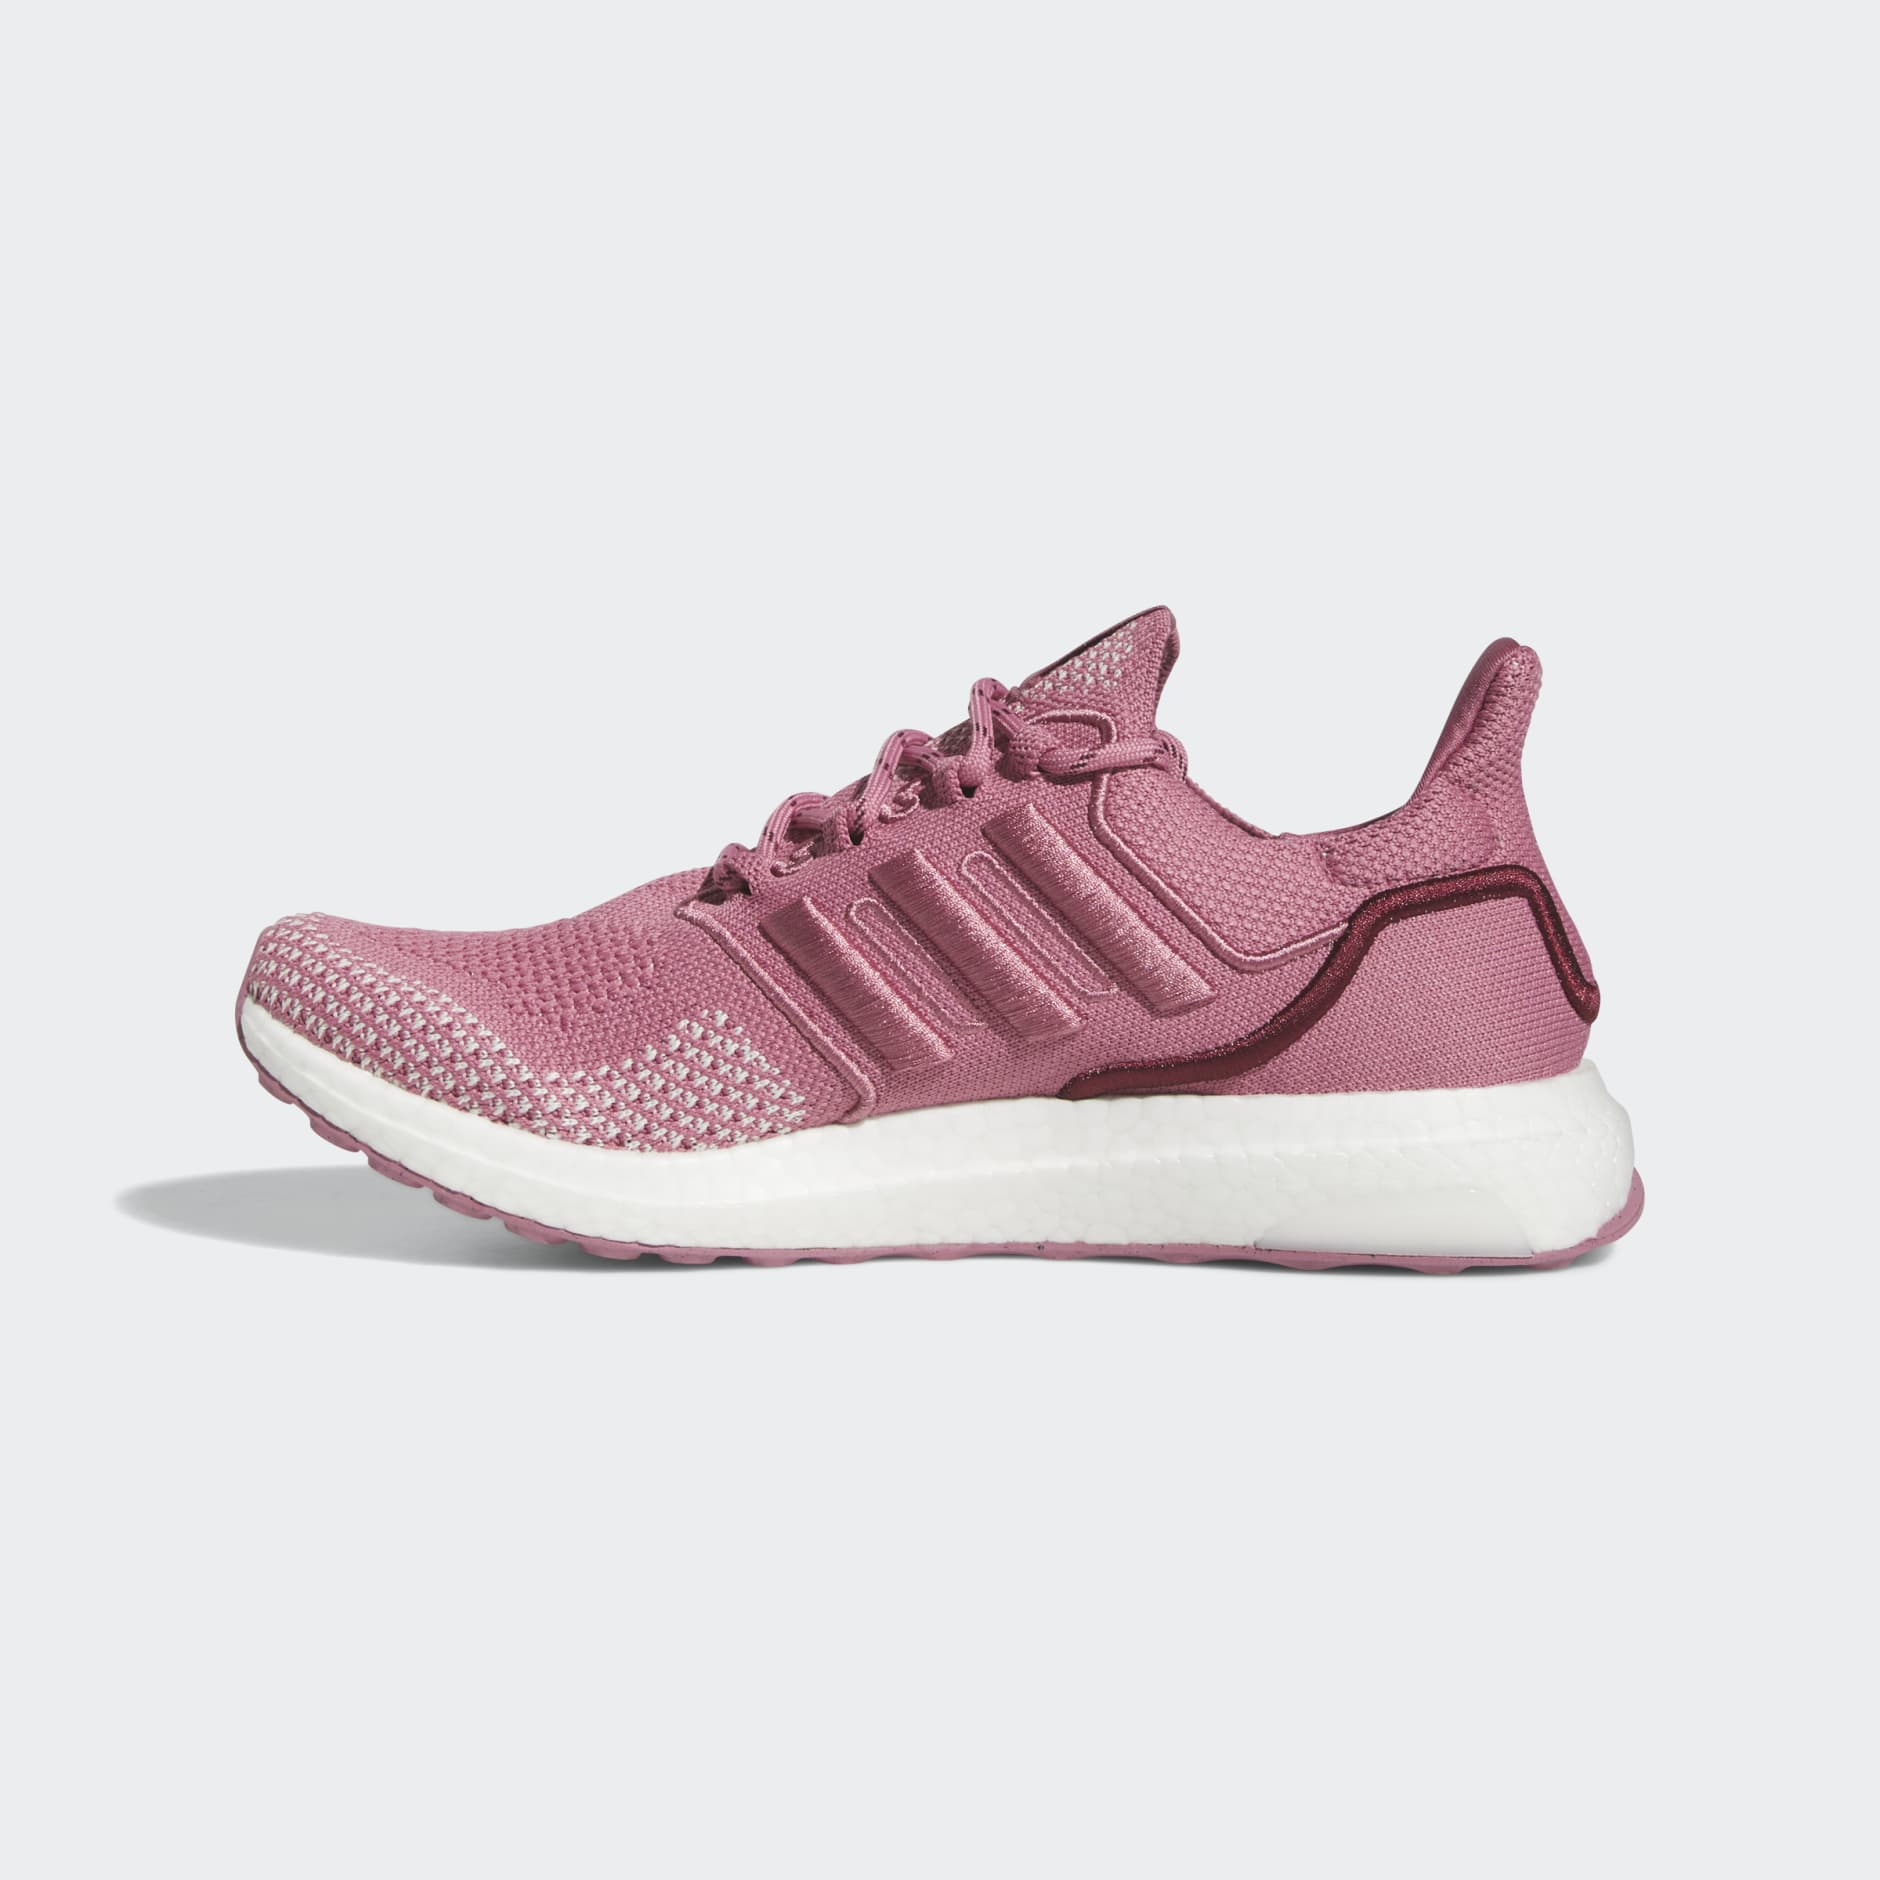 Women's Shoes - Ultraboost 1.0 Shoes - Pink | adidas Egypt